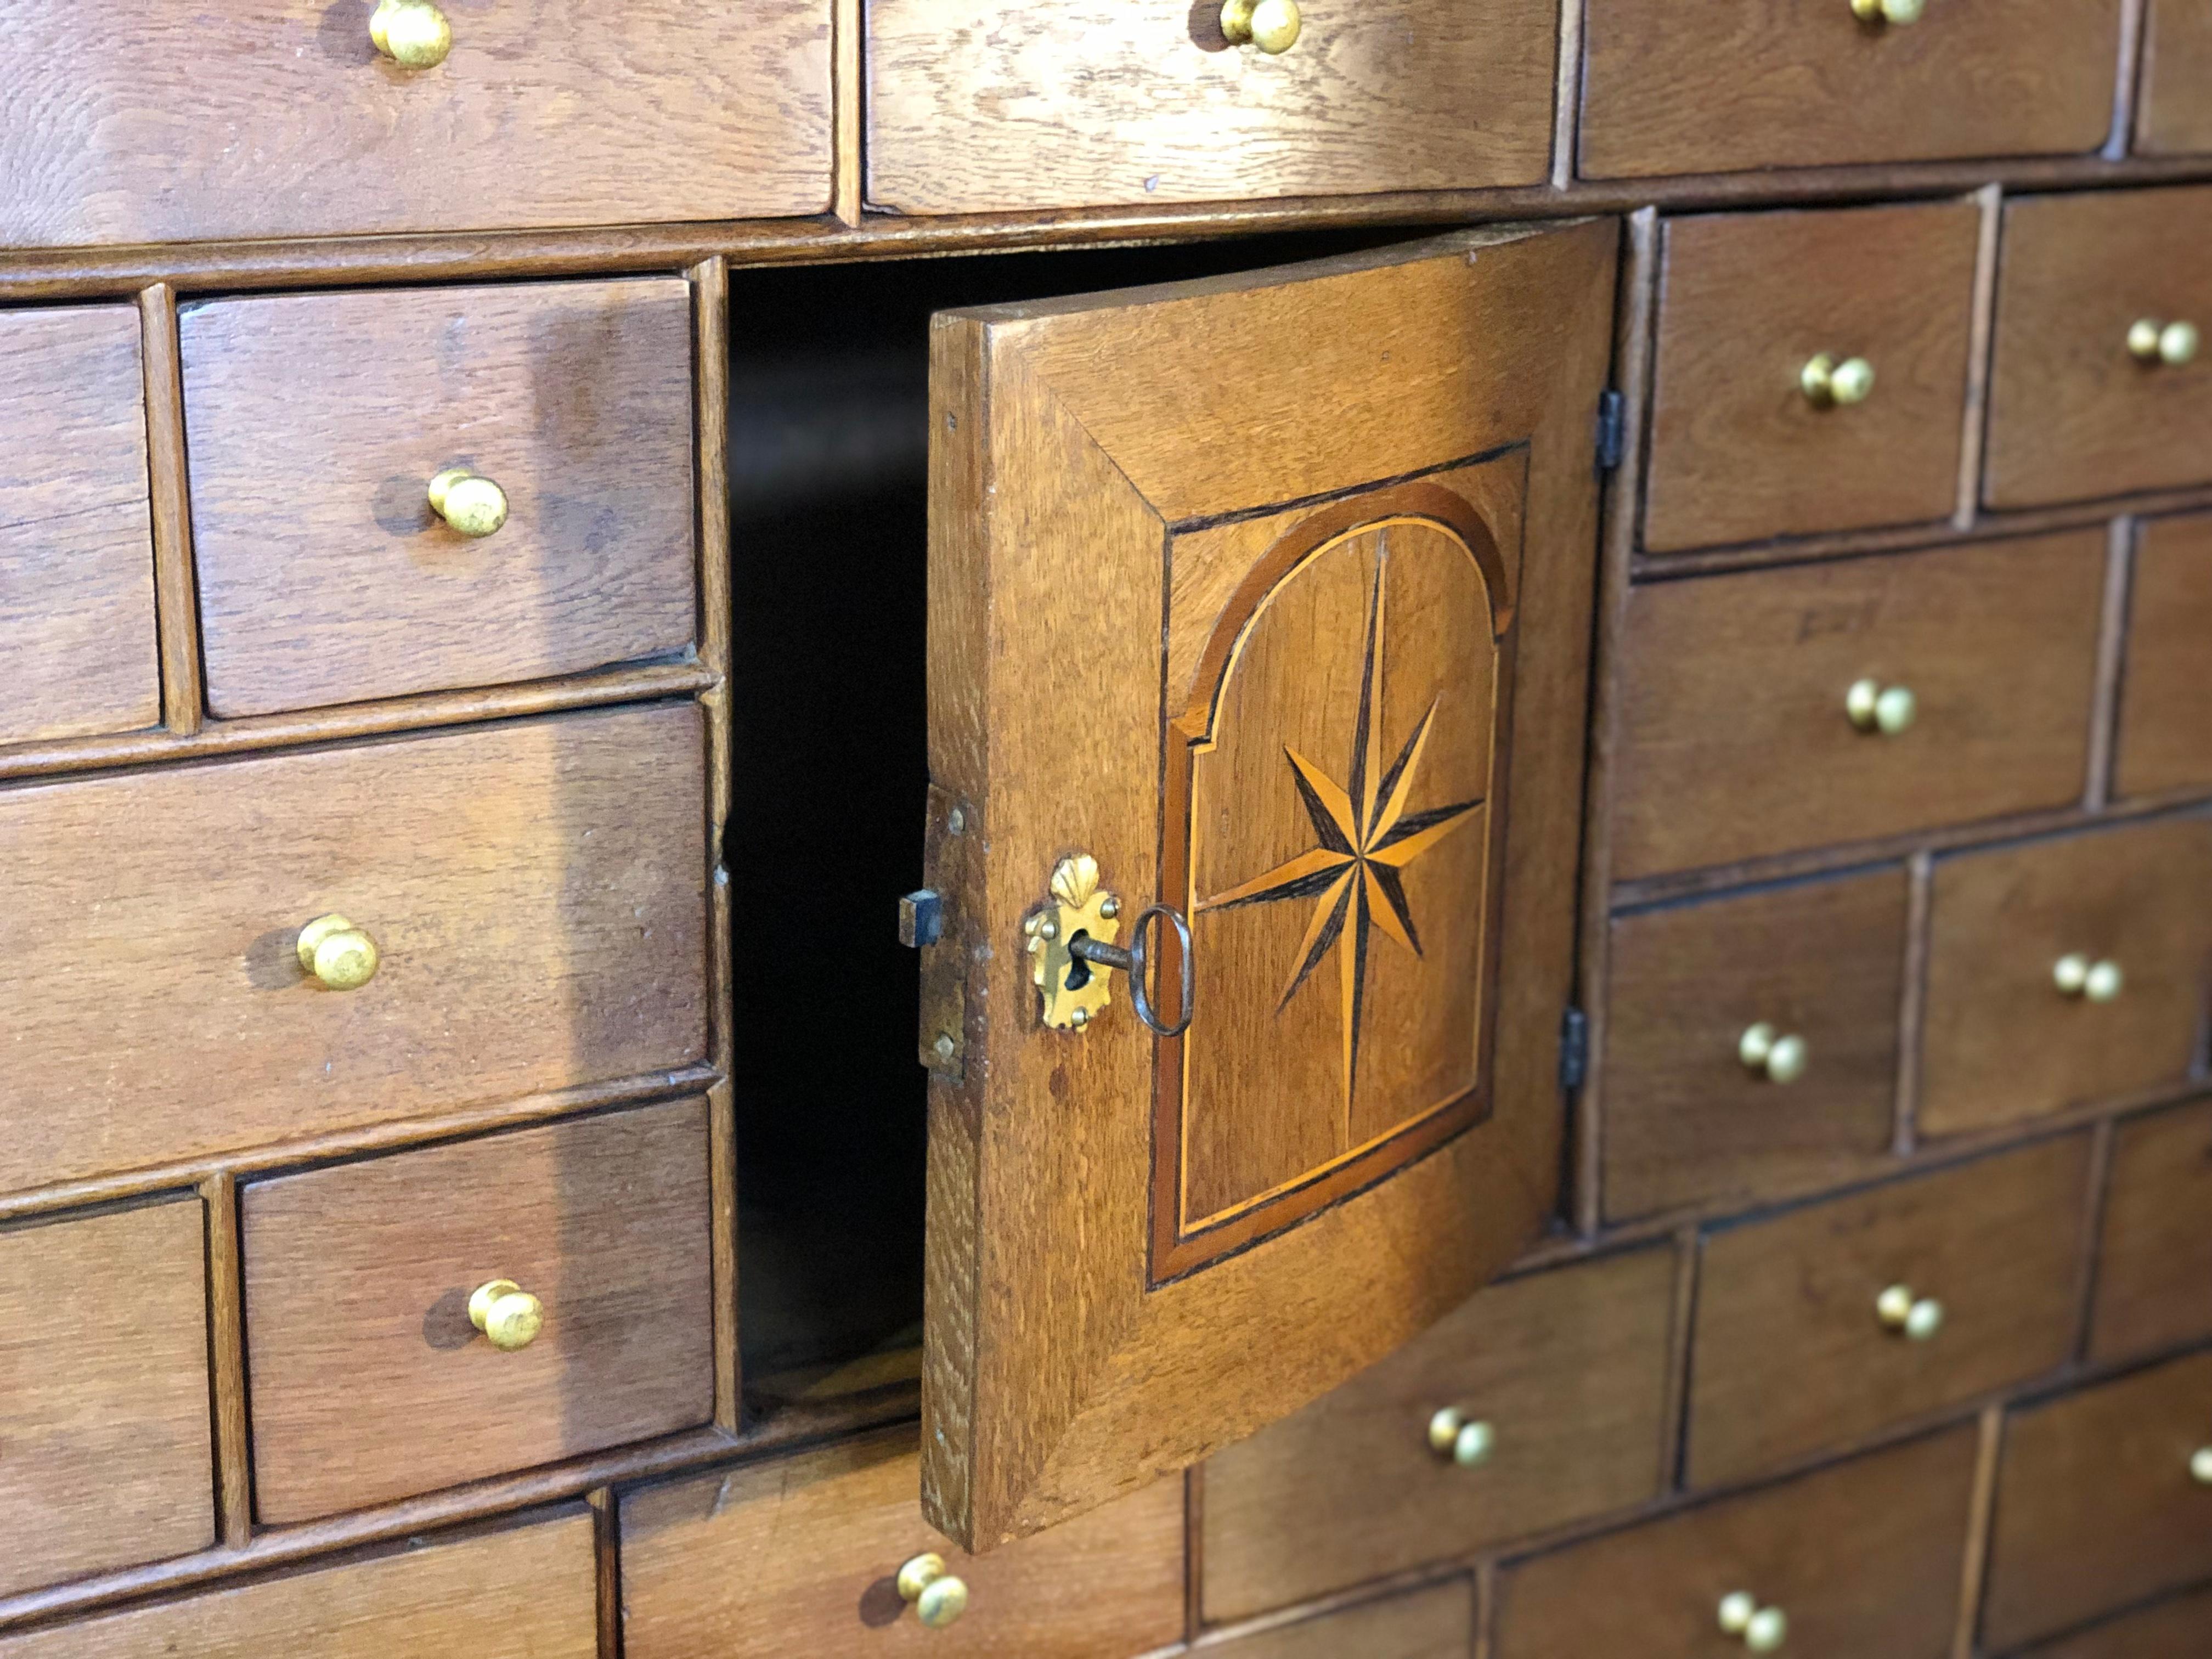 A very late 18th to early 19th century Scandinavian Curiosity cabinet. Handcrafted in European oak with original hand forged metal work and keys. Some lovely inlay to the central focus cabinet door surrounded by multiple various sized drawers. This